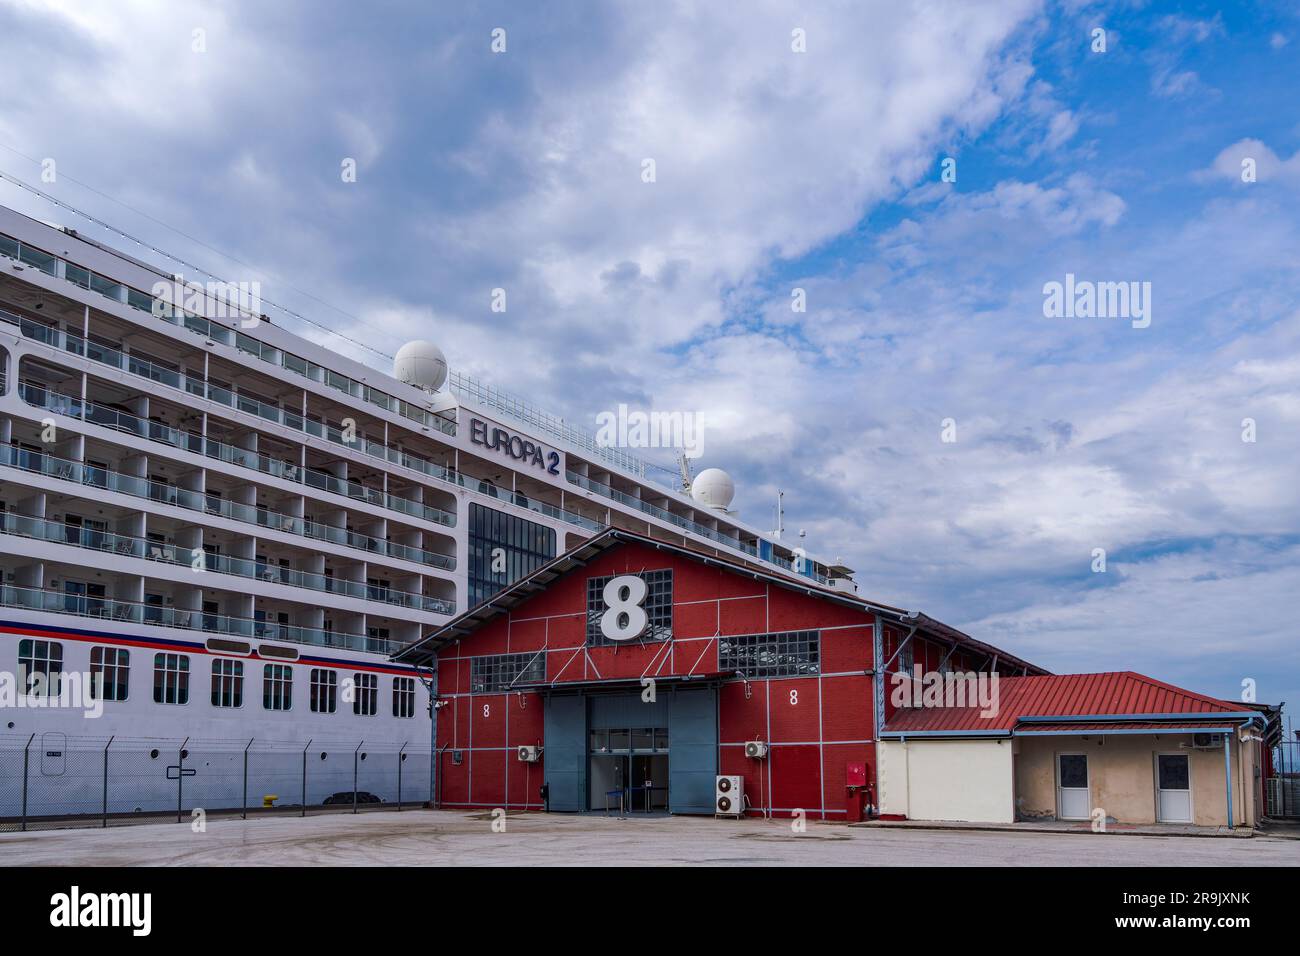 Europa 2 Hapag-Lloyd luxury cruise ship moored on renovated Warehouse 8 Terminal at the port of Thessaloniki, Greece Stock Photo